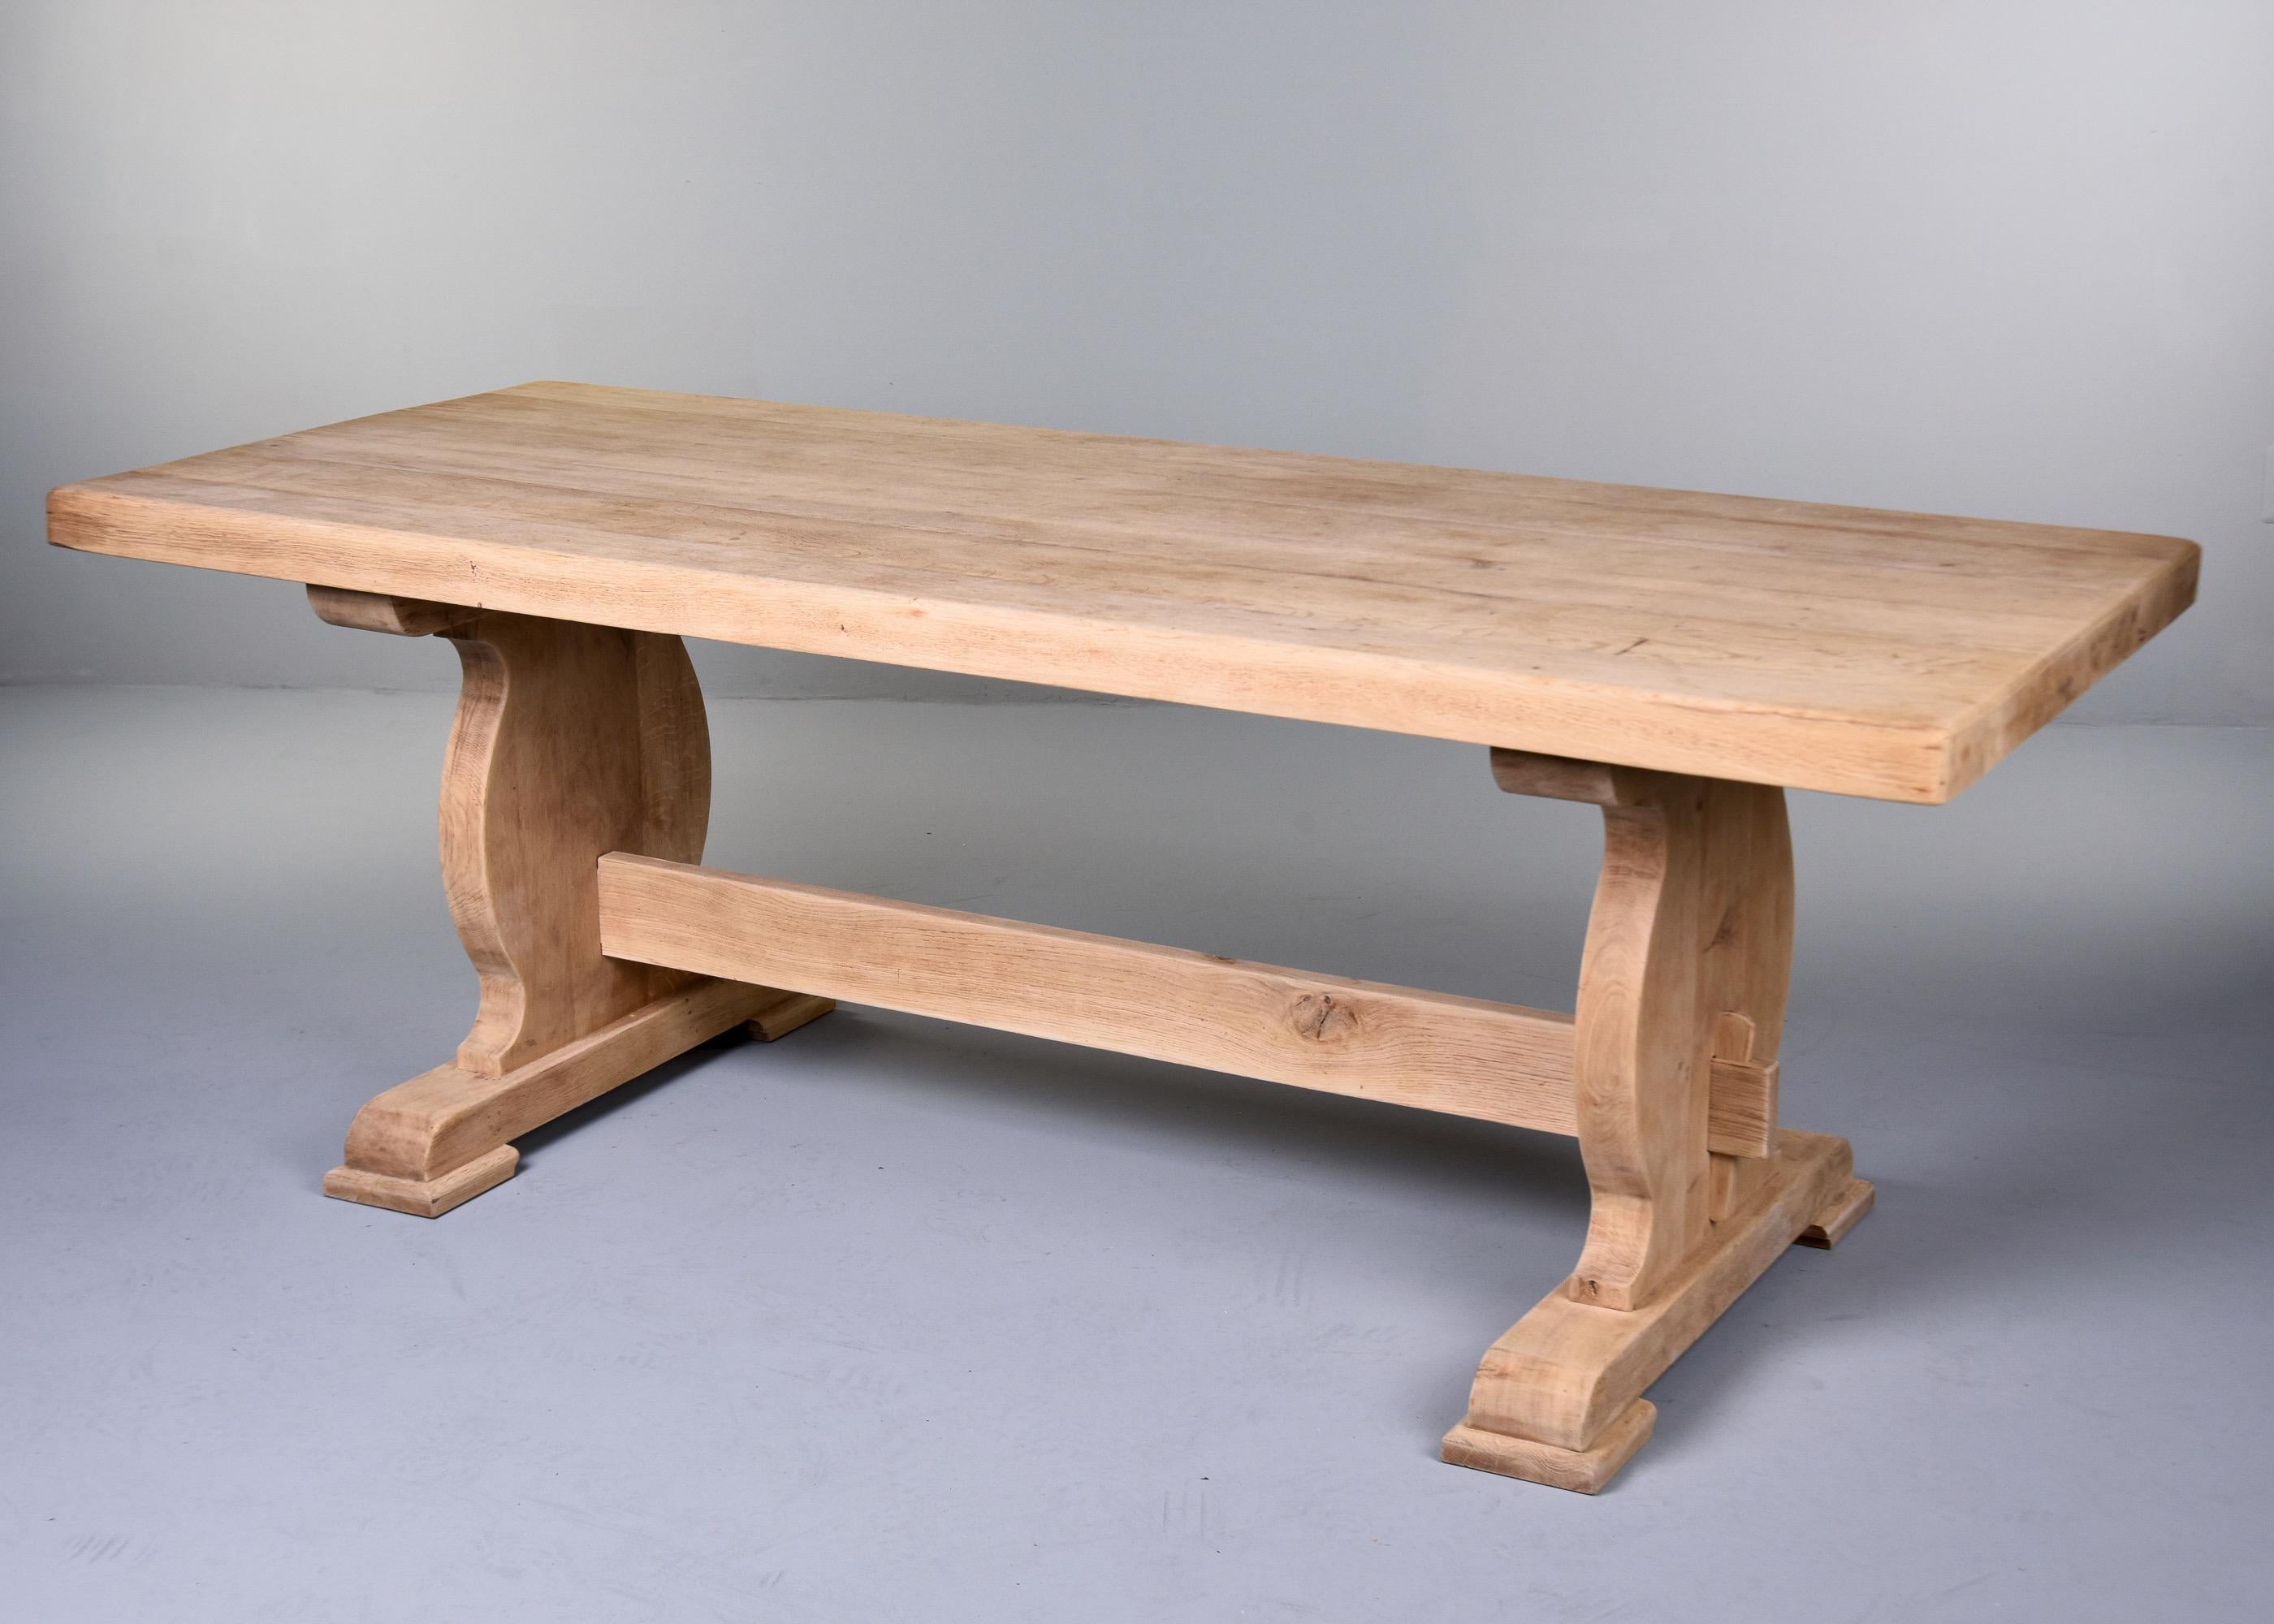 French Provincial Circa 1900 Sanded Bare Oak French Country Trestle Table